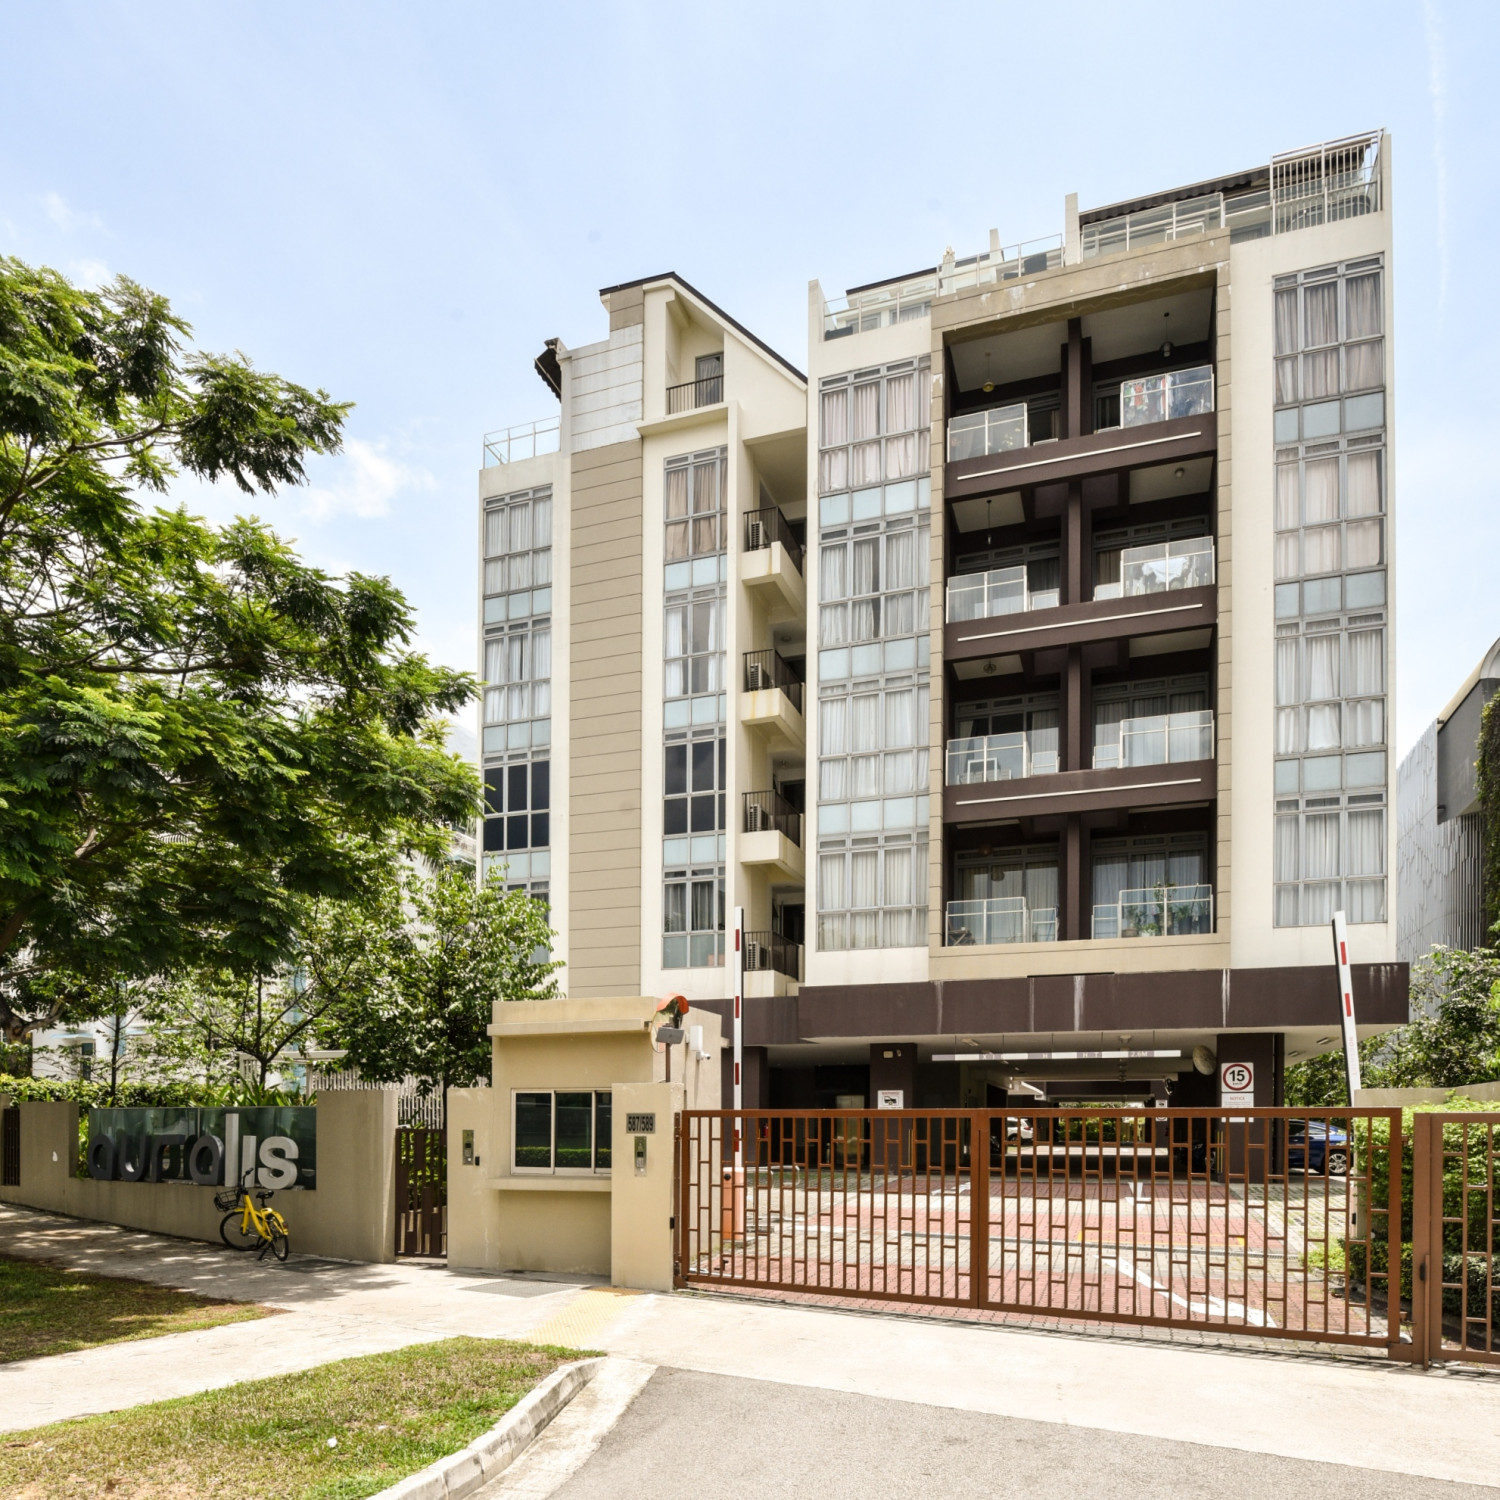 DEAL WATCH: Freehold two-bedder at Auralis on the market for $1.25 mil - Property News